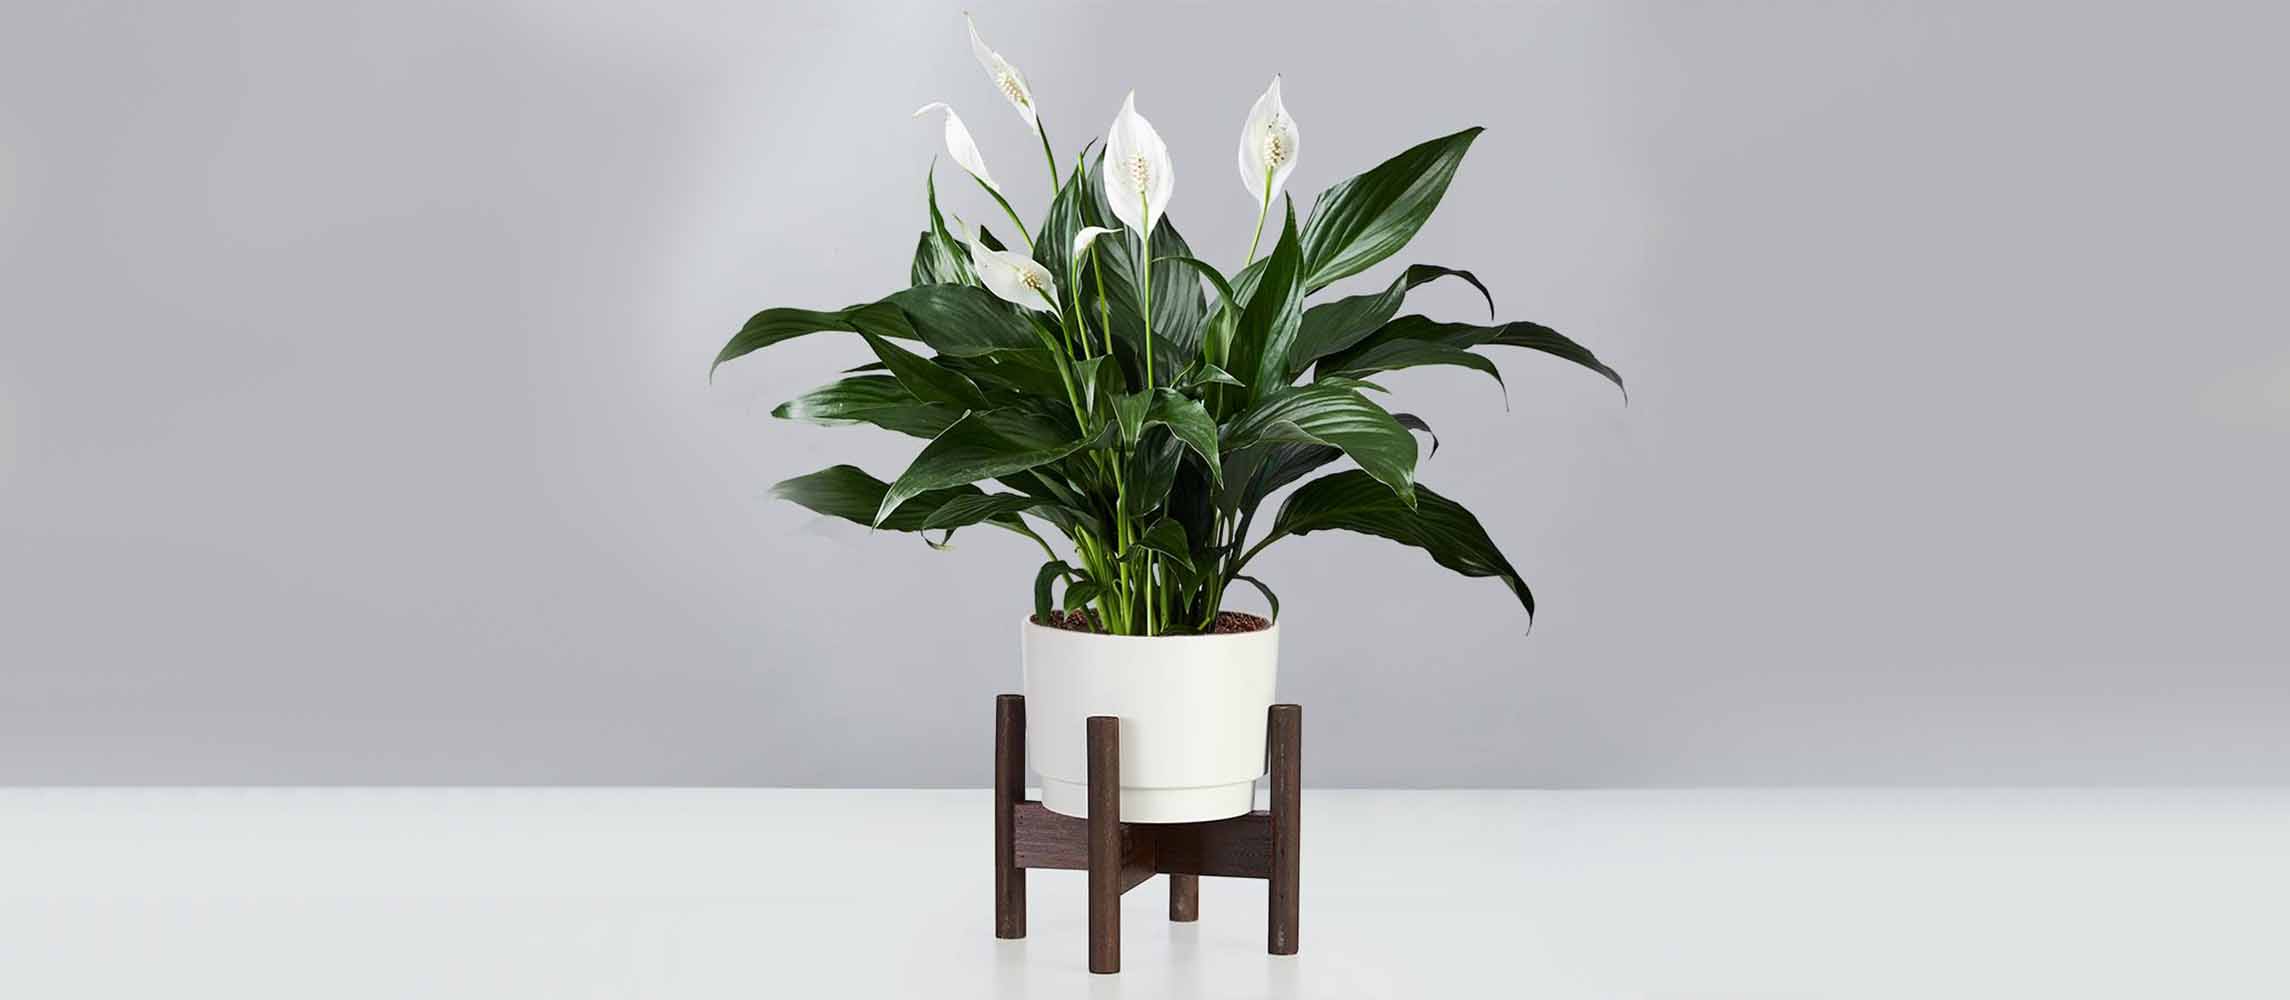 The Peace Lily (Spathiphyllum)